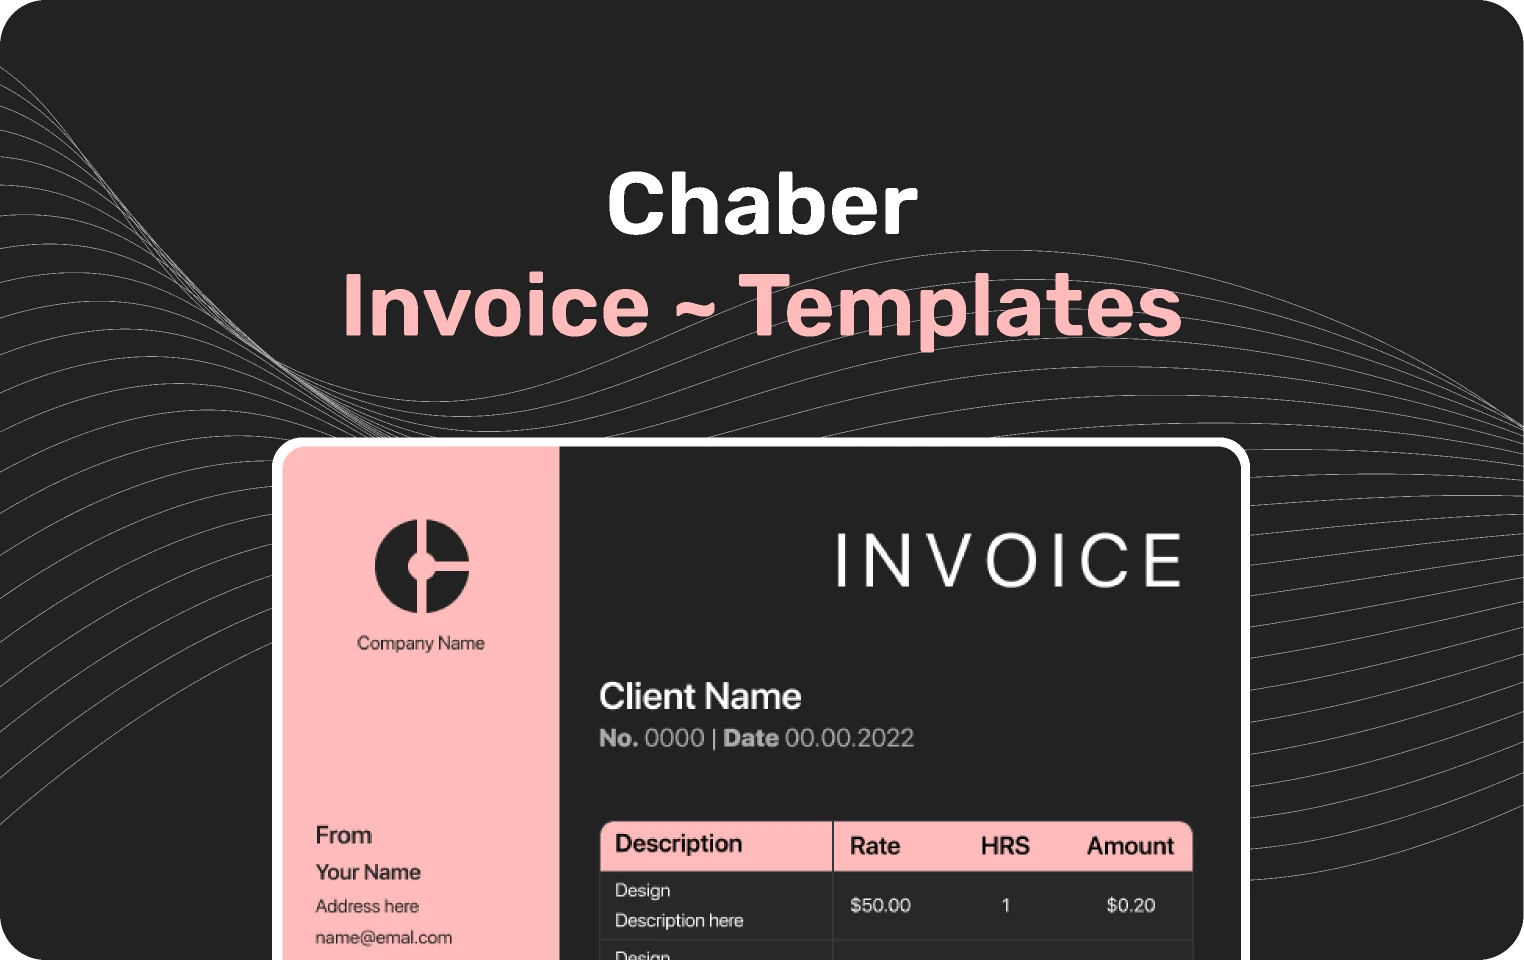 Chaber - Invoice Illustration Pack (Community) for Figma and Adobe XD